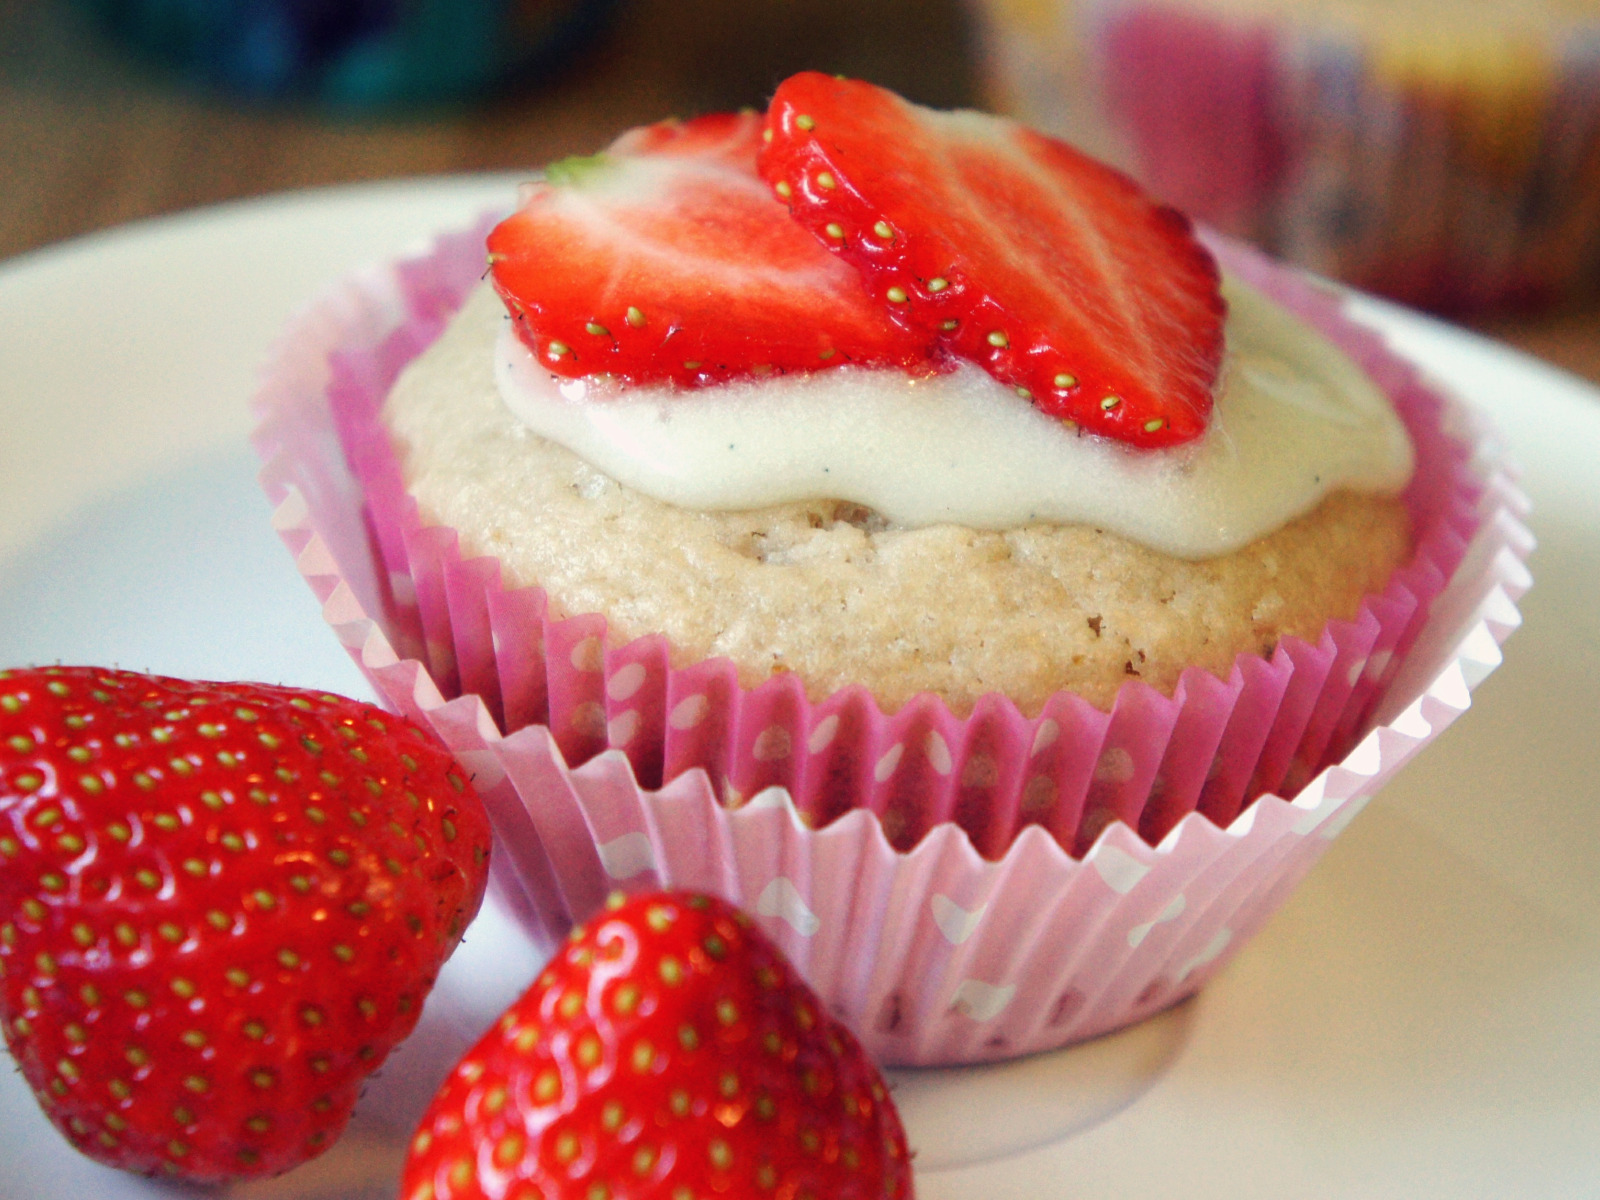 Download wallpaper Strawberry, Strawberry, Cupcake, section food in resolut...